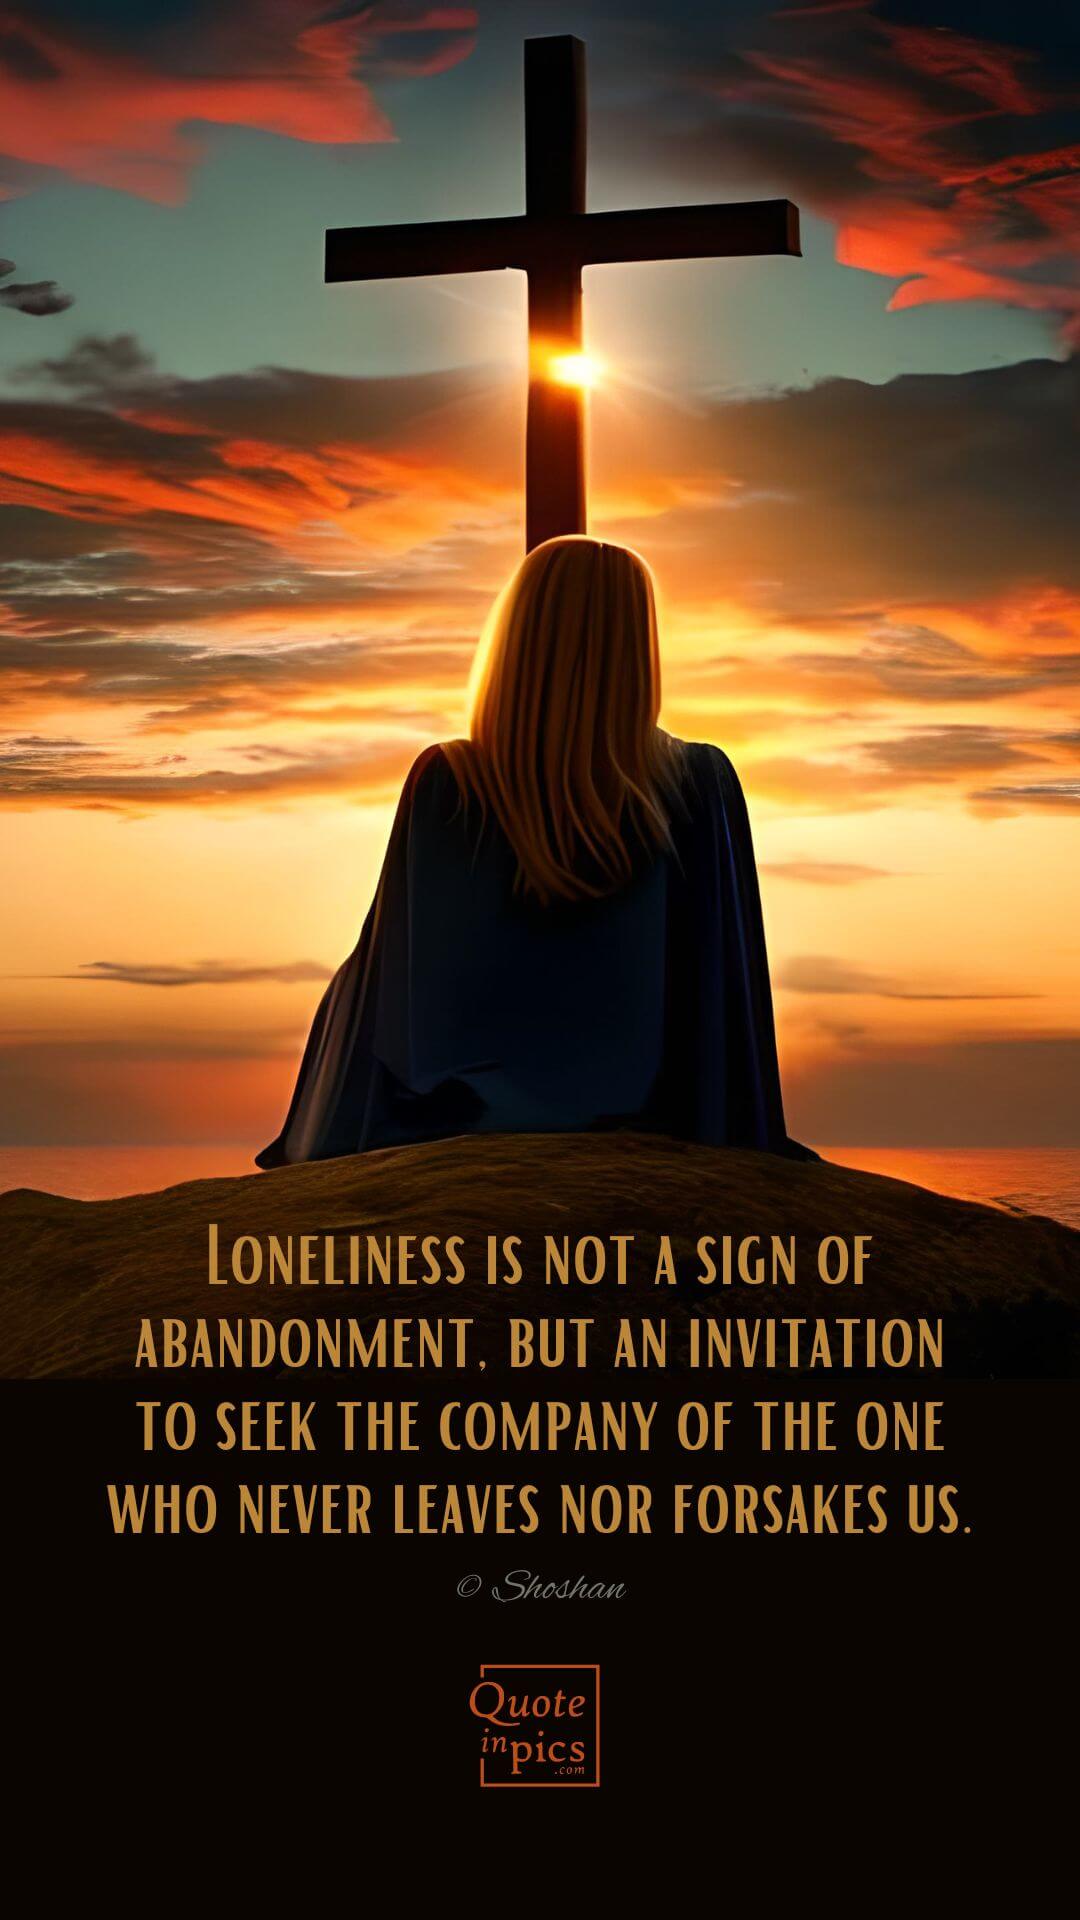 In times of loneliness, let us remember that God is there for us